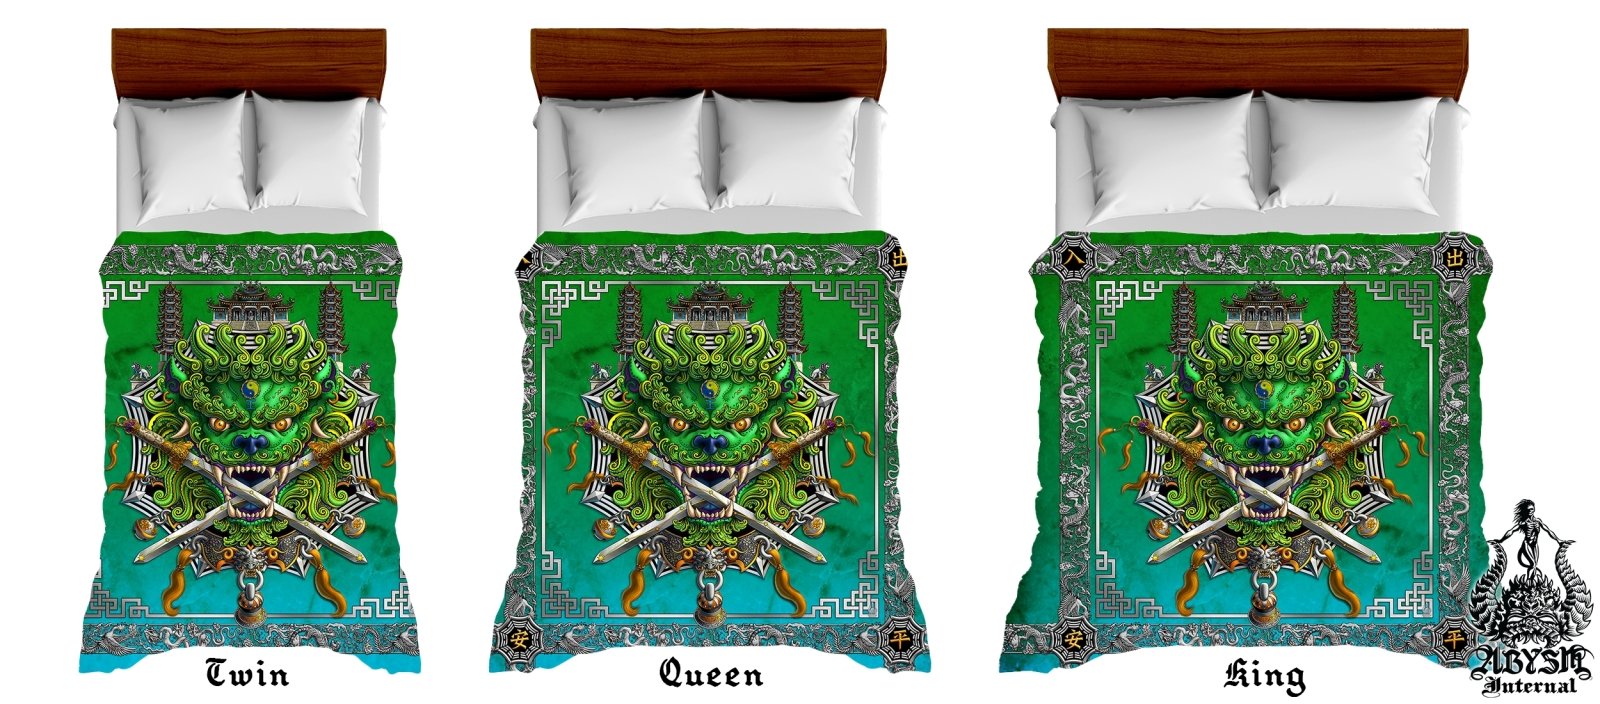 Asian Lion Bedding Set, Comforter and Duvet, Taiwan Sword Lion, Chinese Bed Cover, Gamer Bedroom, Indie Decor, King, Queen and Twin Size - Green - Abysm Internal